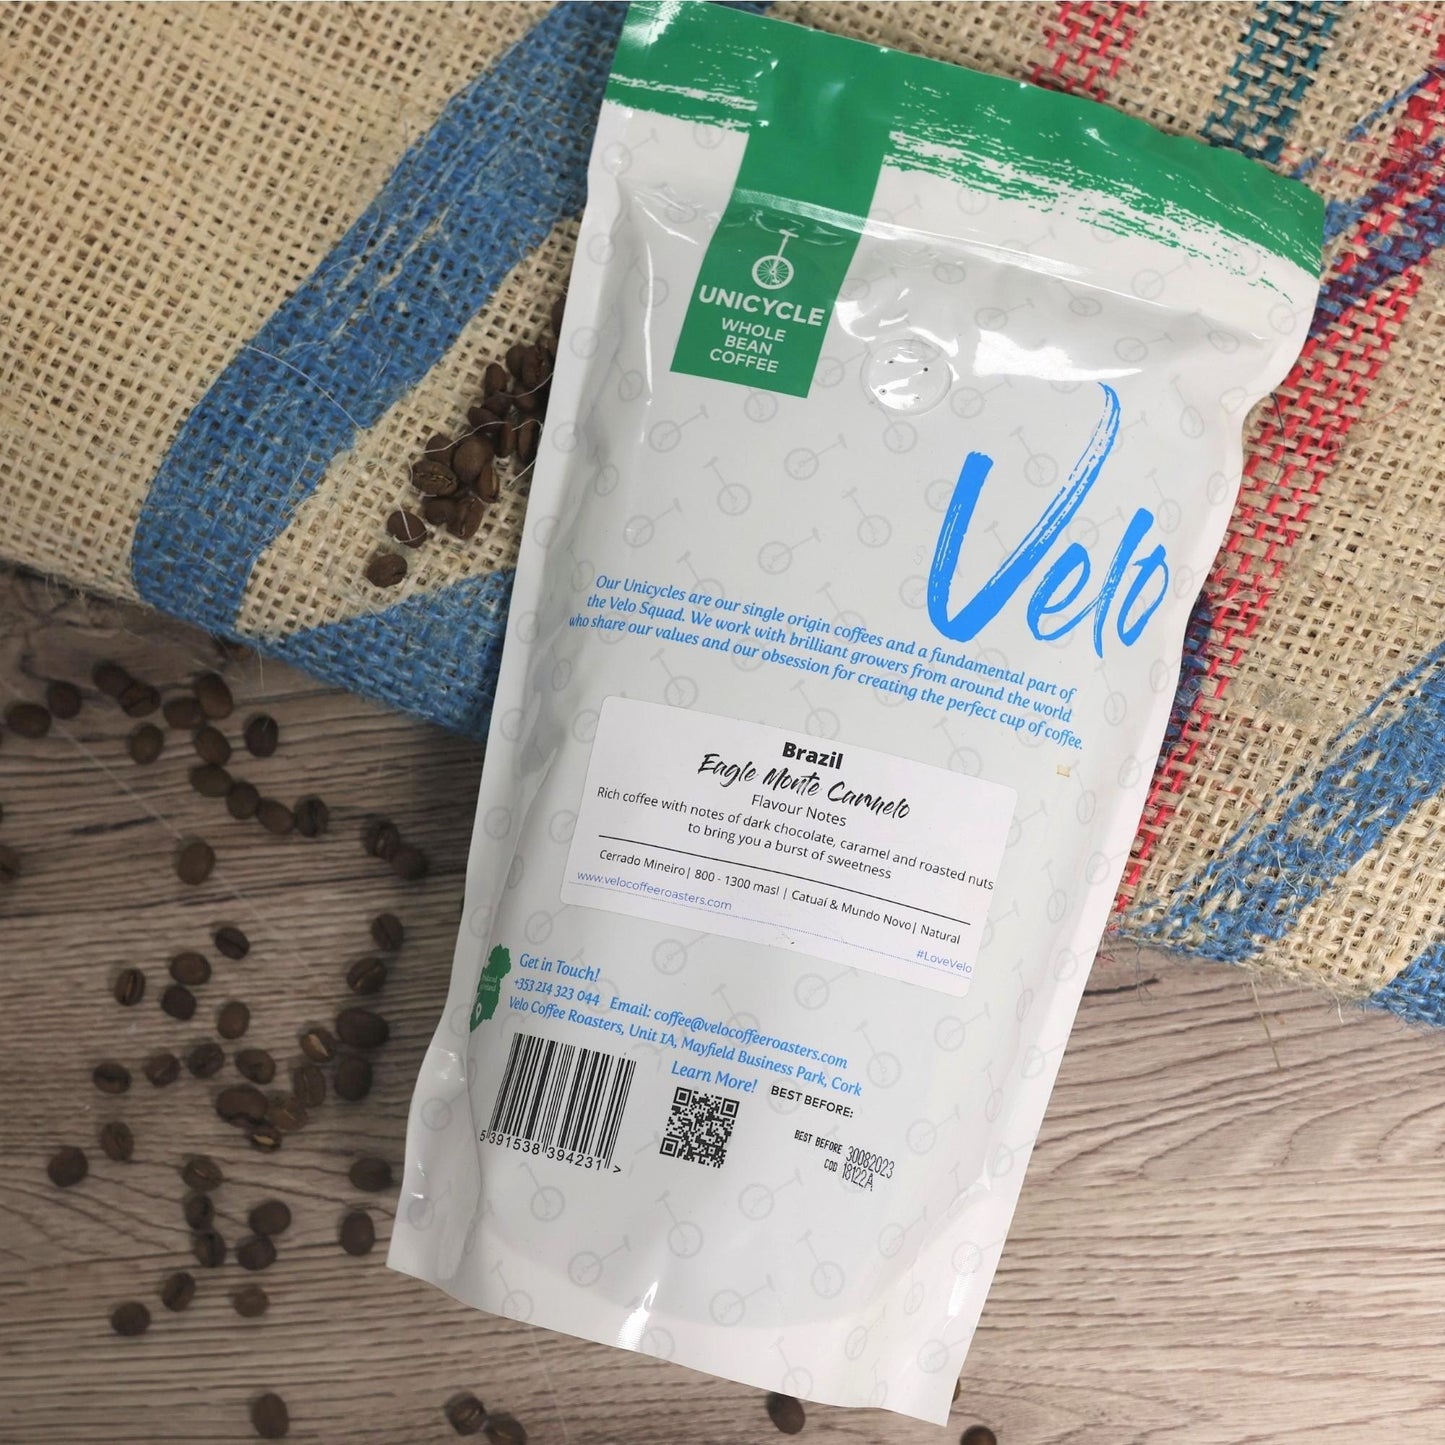 Eagle Monte Carmelo 700G Coffee From Brazil - White and Green bag Velo Coffee Roasters